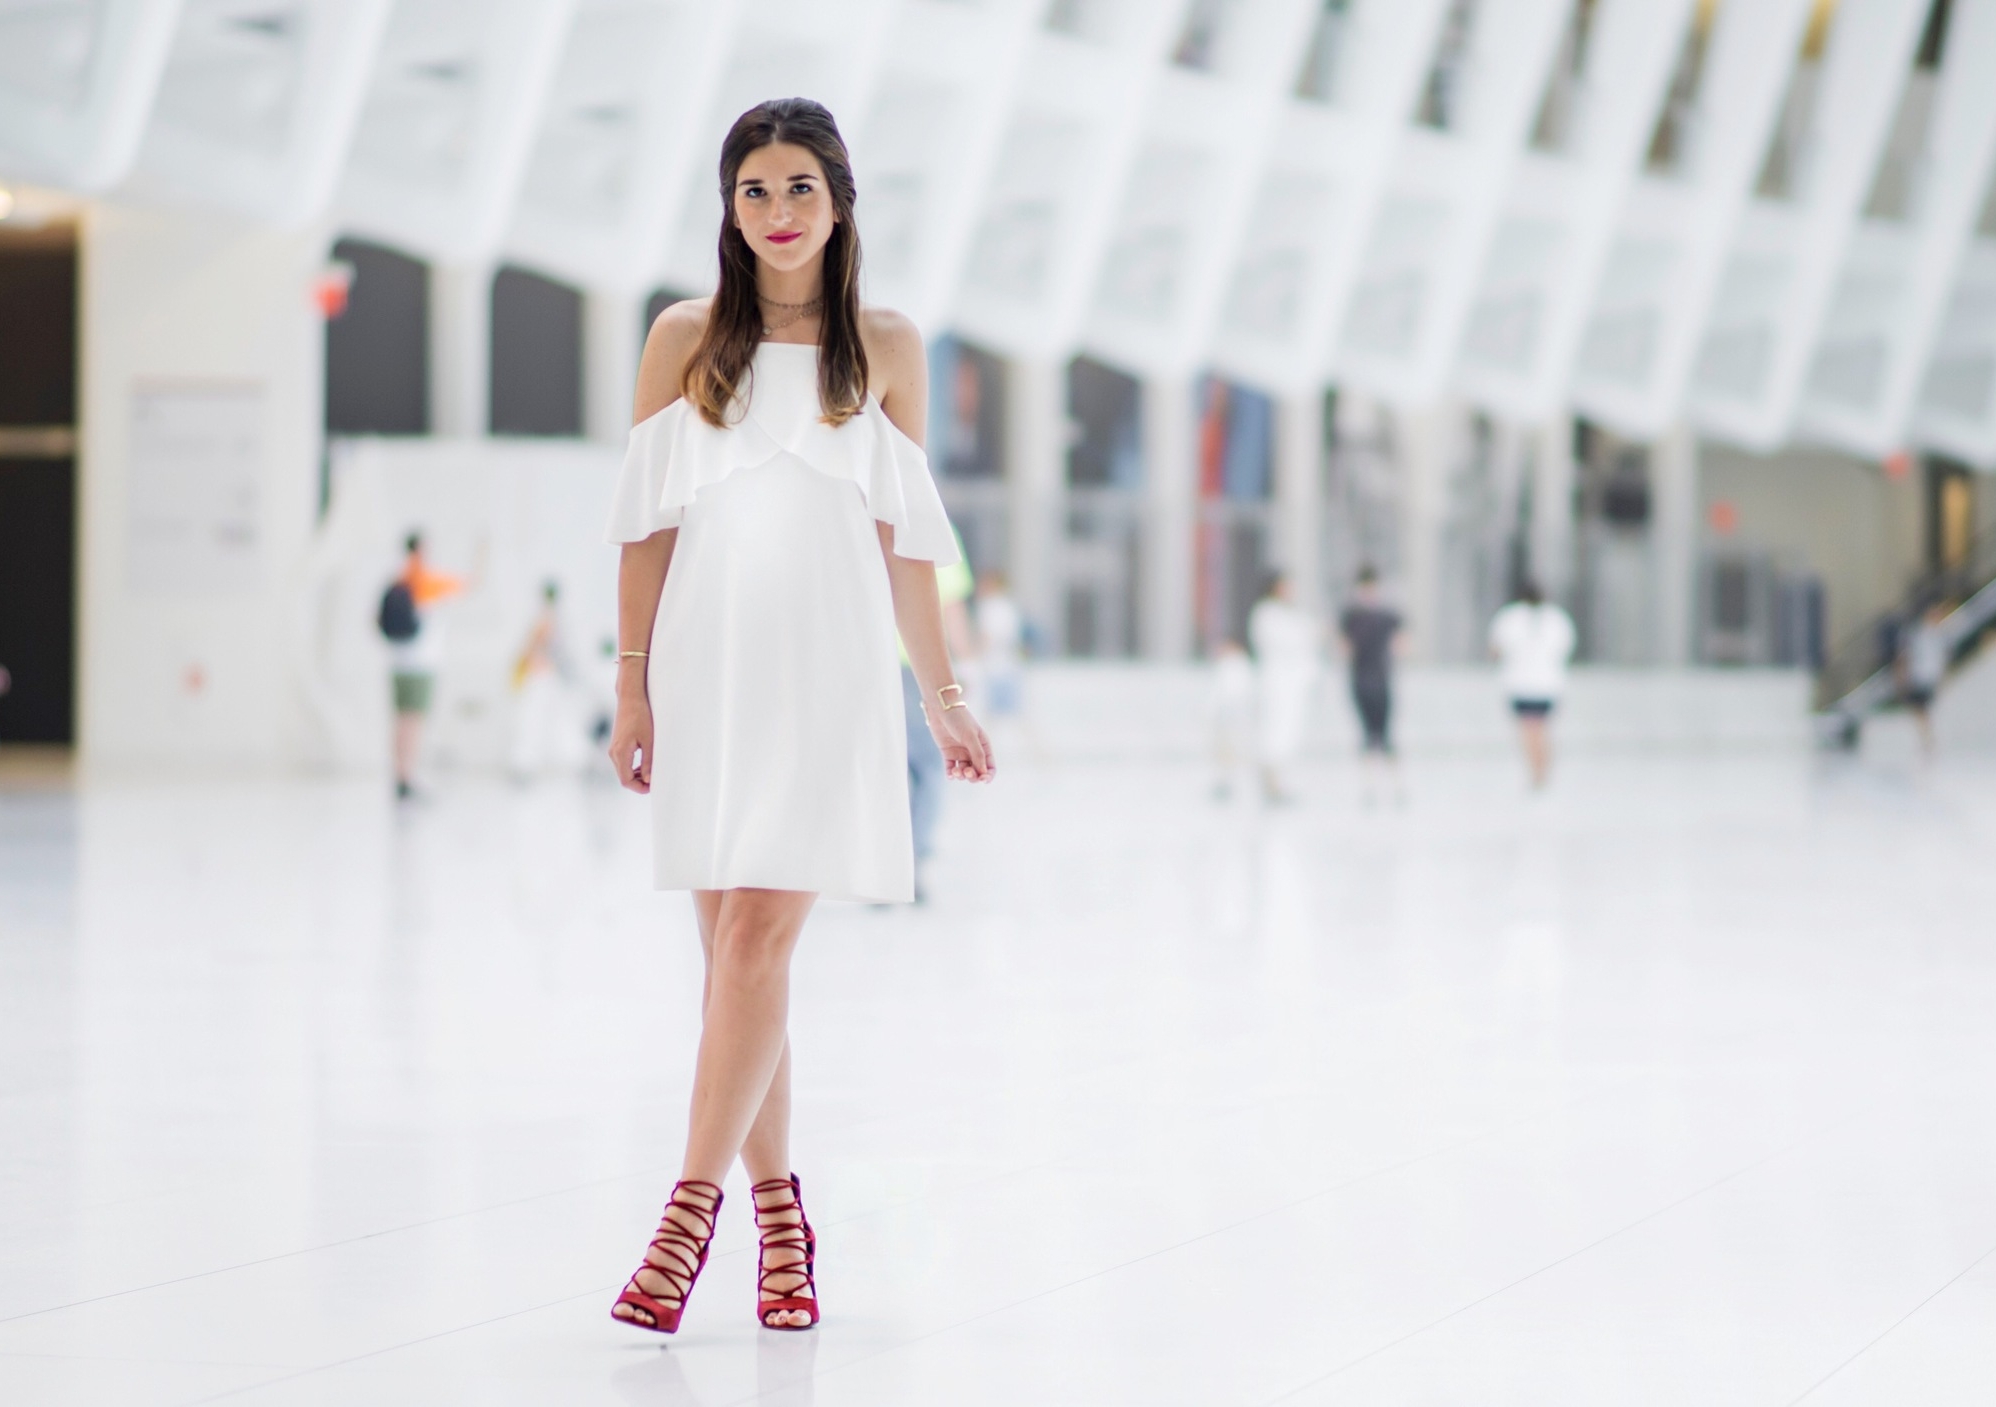 Cold Shoulder White Dress Red Heels Louboutins & Love Fashion Blog Esther Santer NYC Street Style Blogger Outfit OOTD Trendy French Connection Zara Beaded Chokers Jewelry Bloomingdale's Girl Women Shoes Pretty Gold Bracelet Hair Inspo Photoshoot Color.jpg